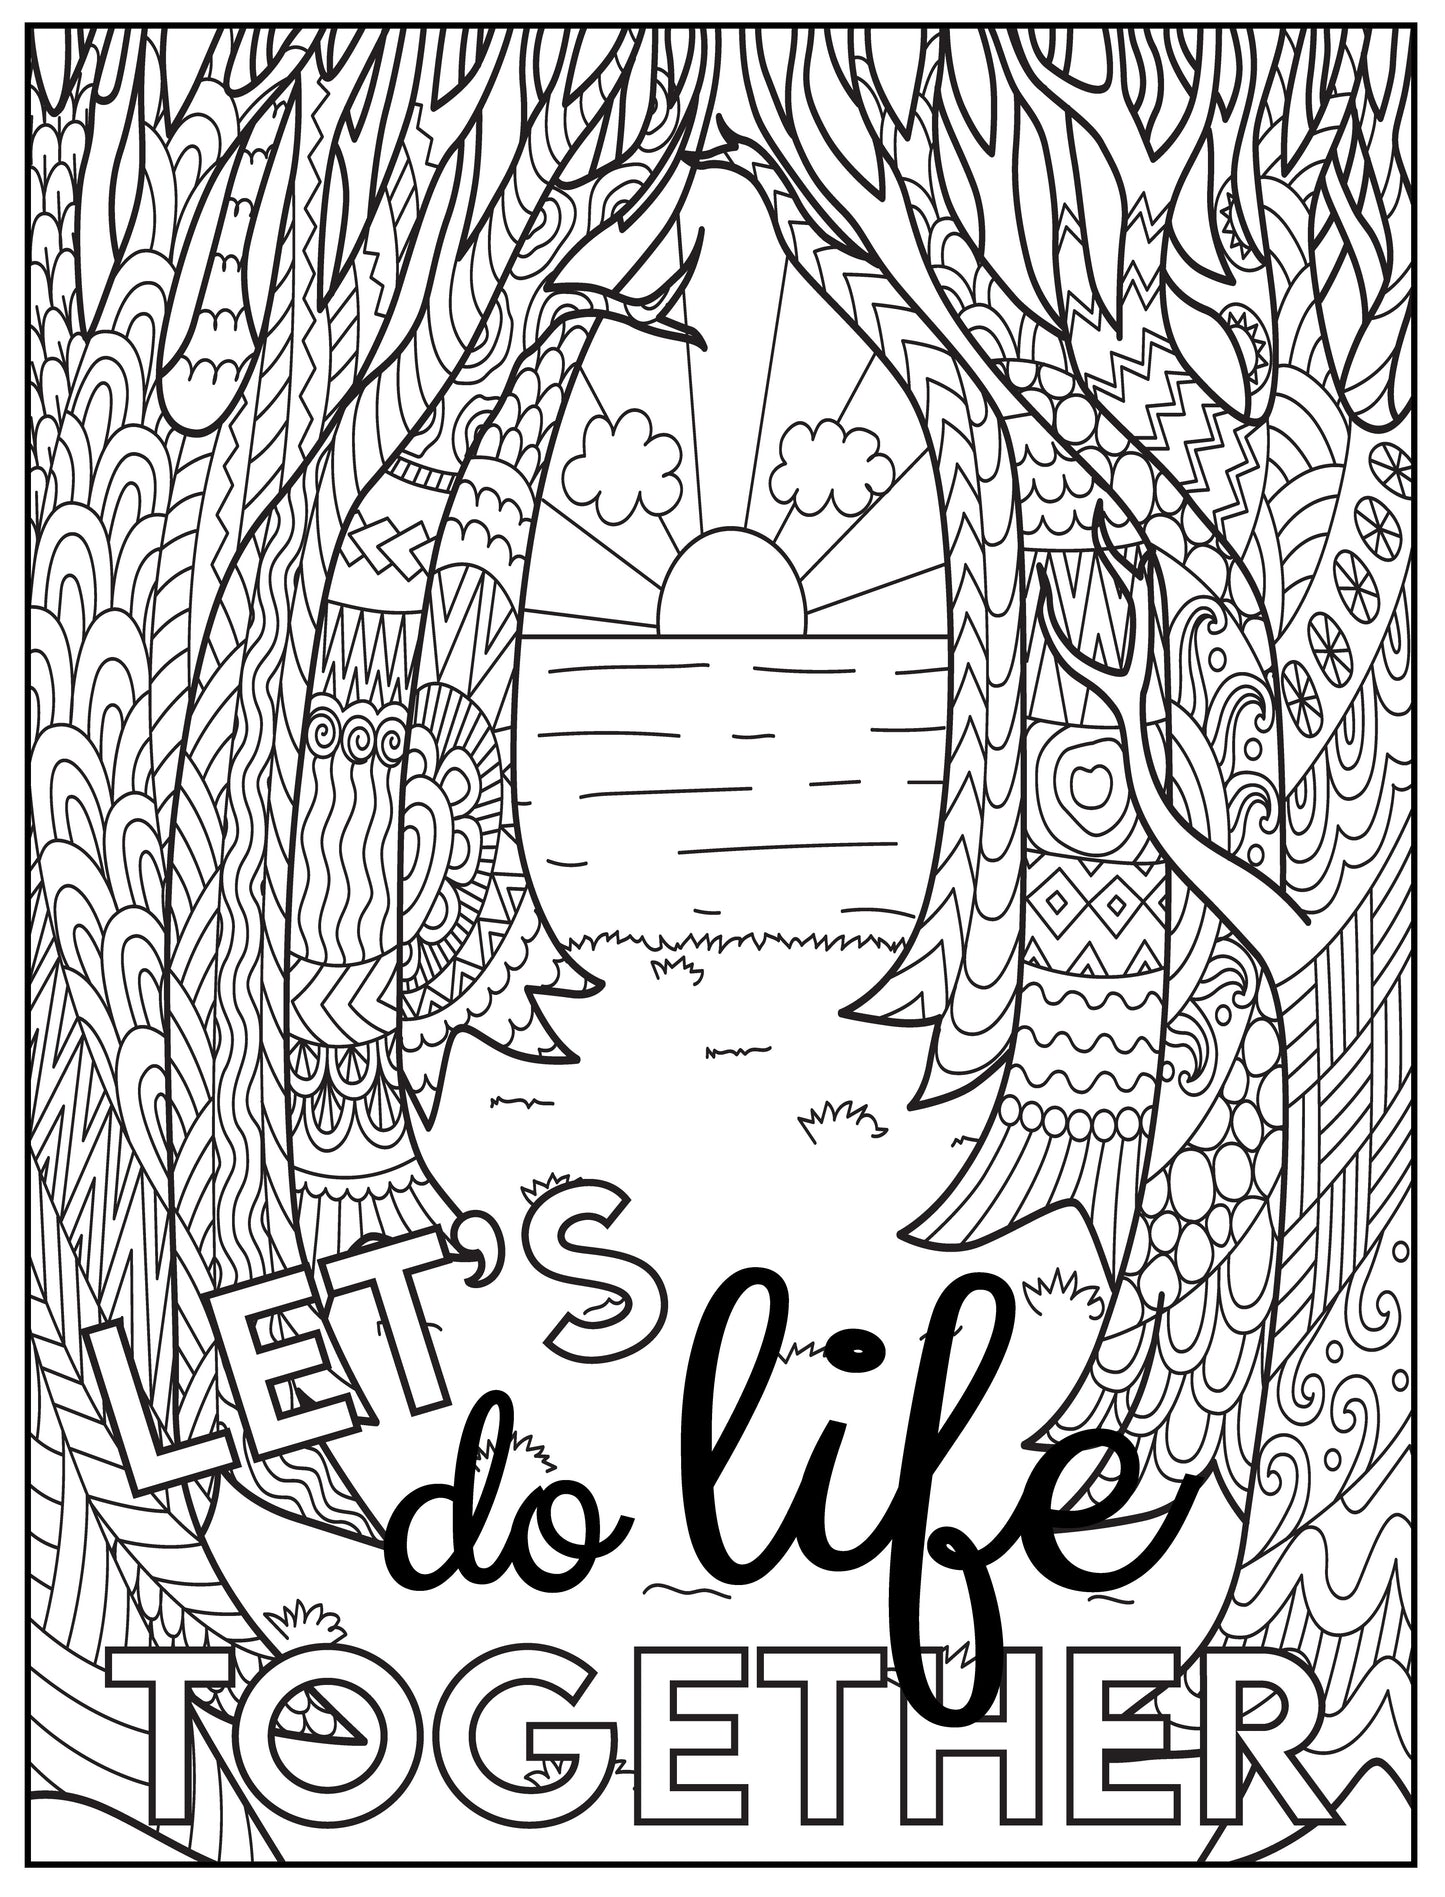 Let's Do Life Personalized Giant Coloring Poster 46" x 60"